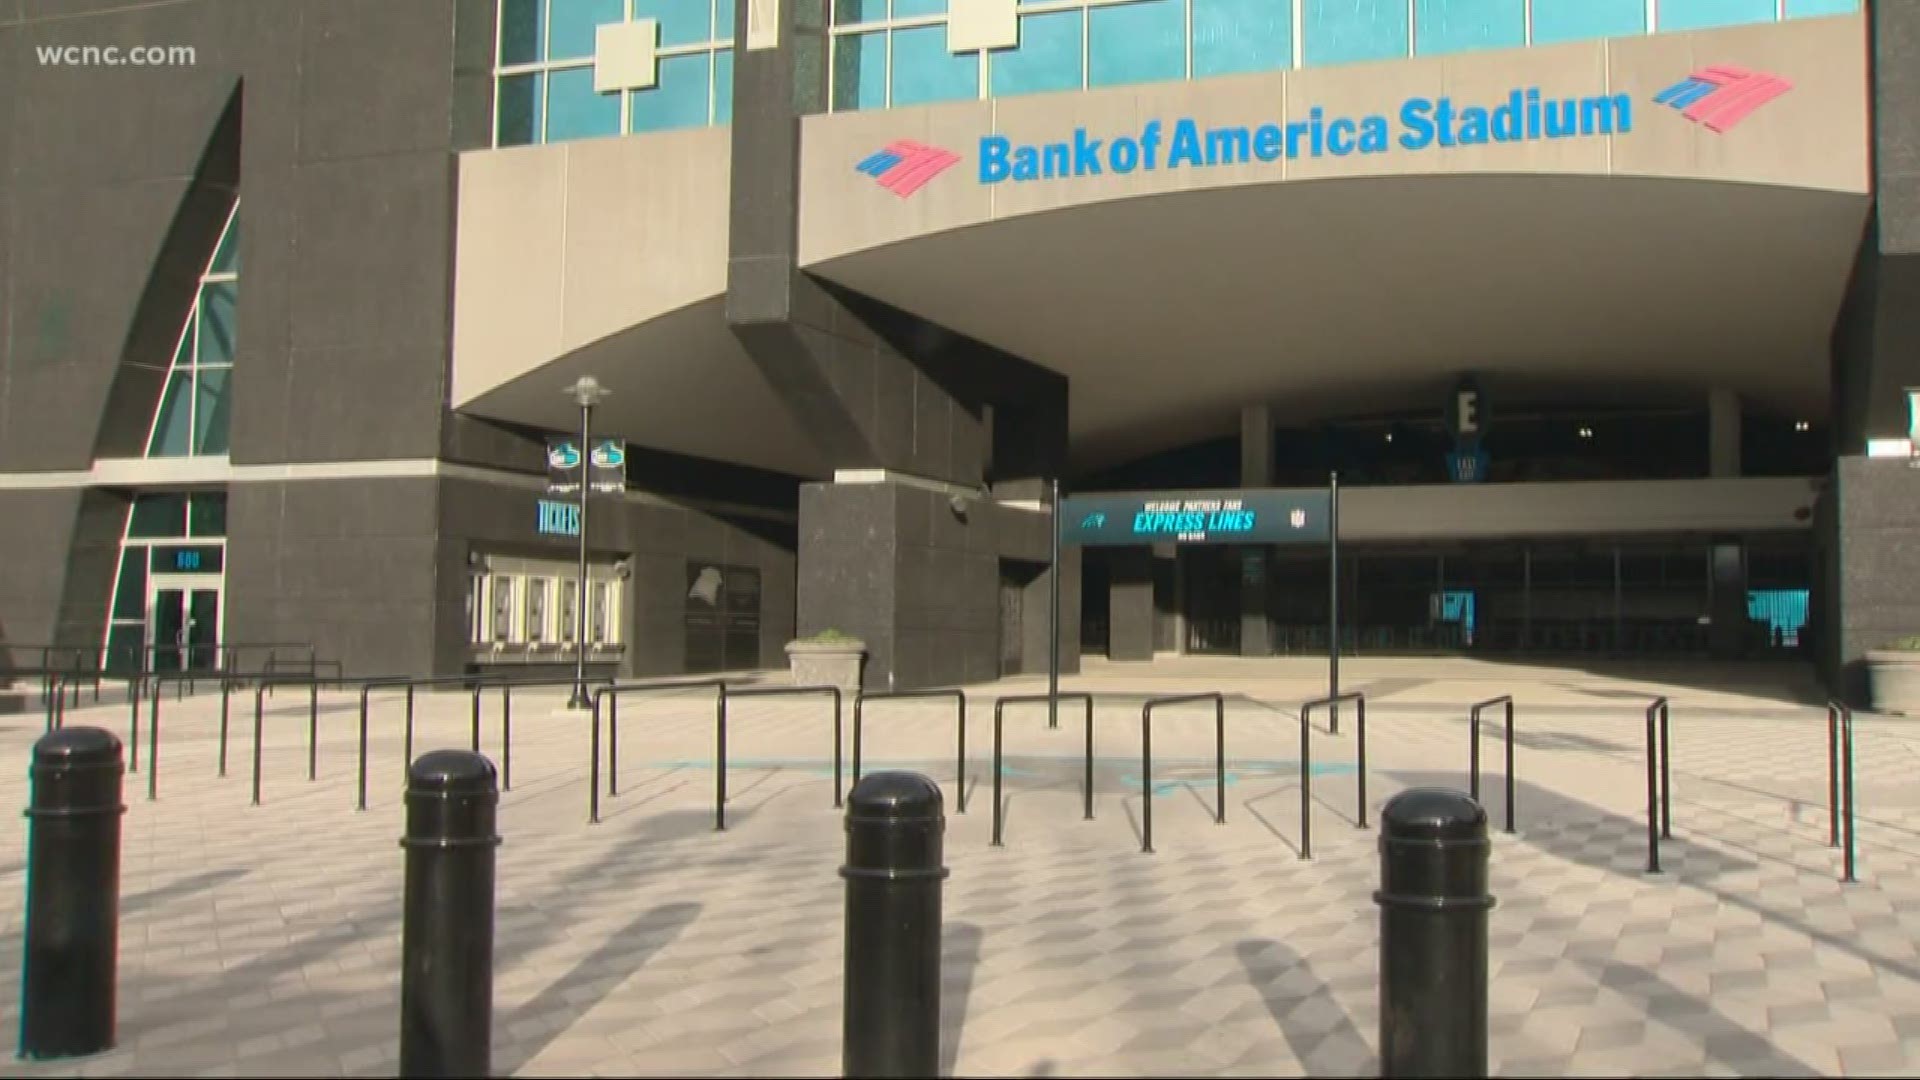 How to get to Bank Of America Stadium in Charlotte by Bus or Light Rail?